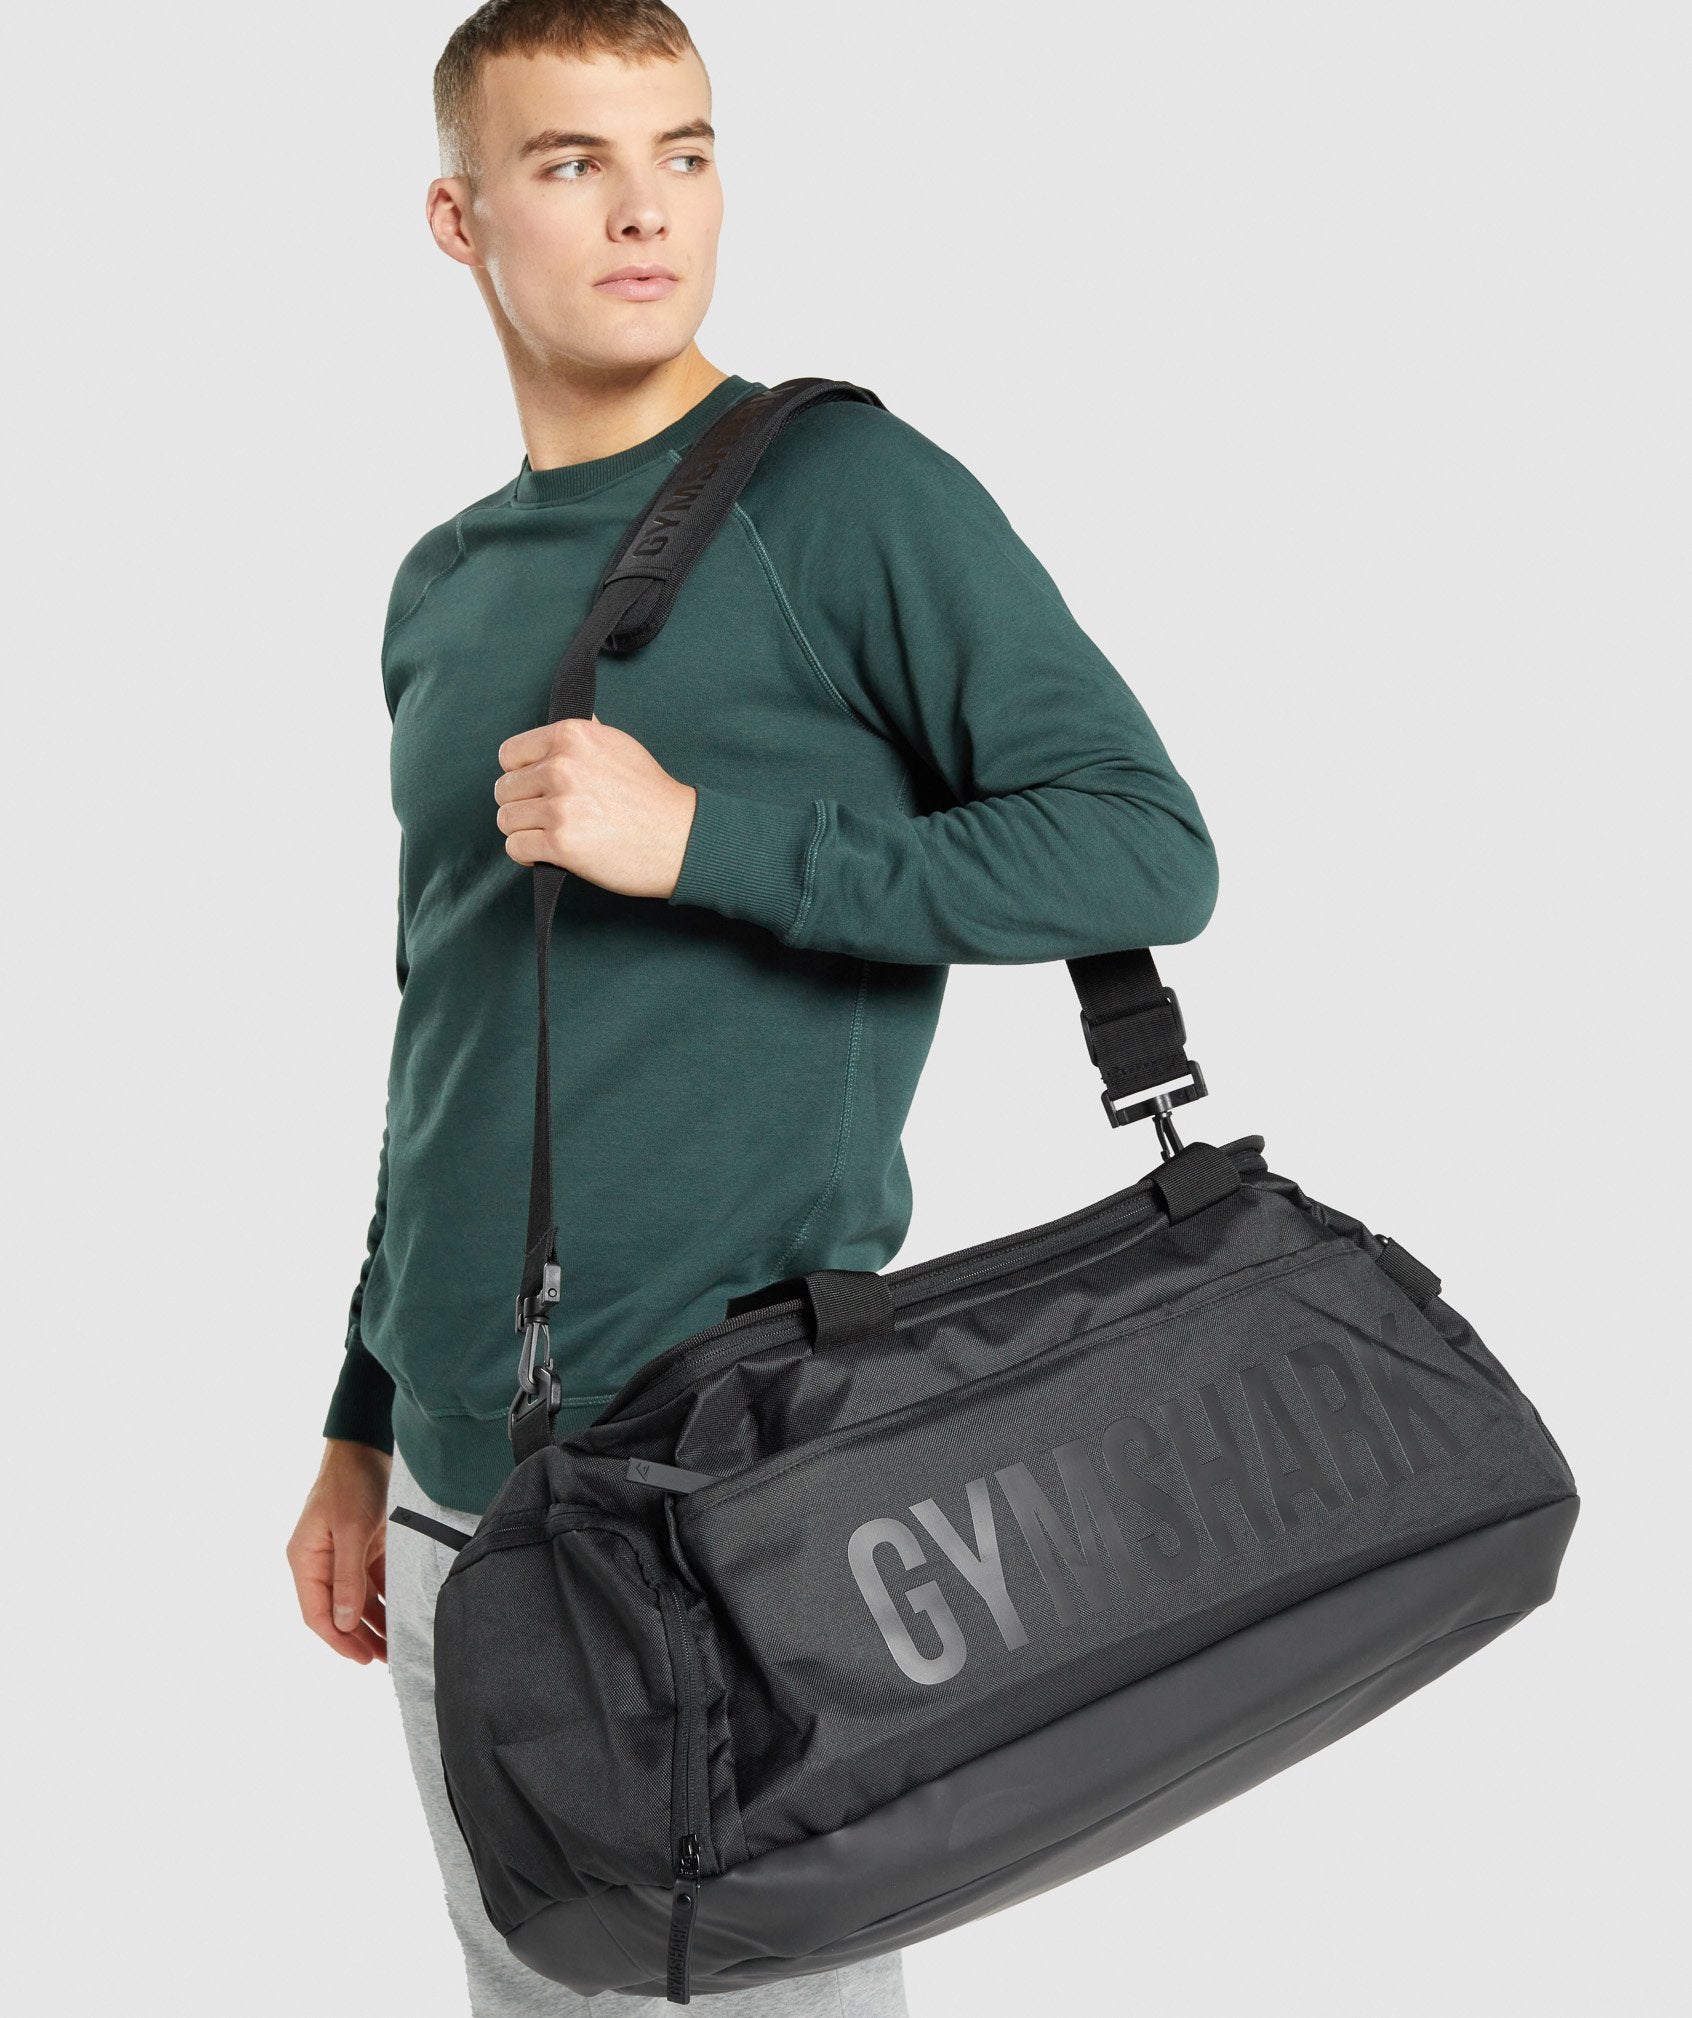 LC Holdall in Black